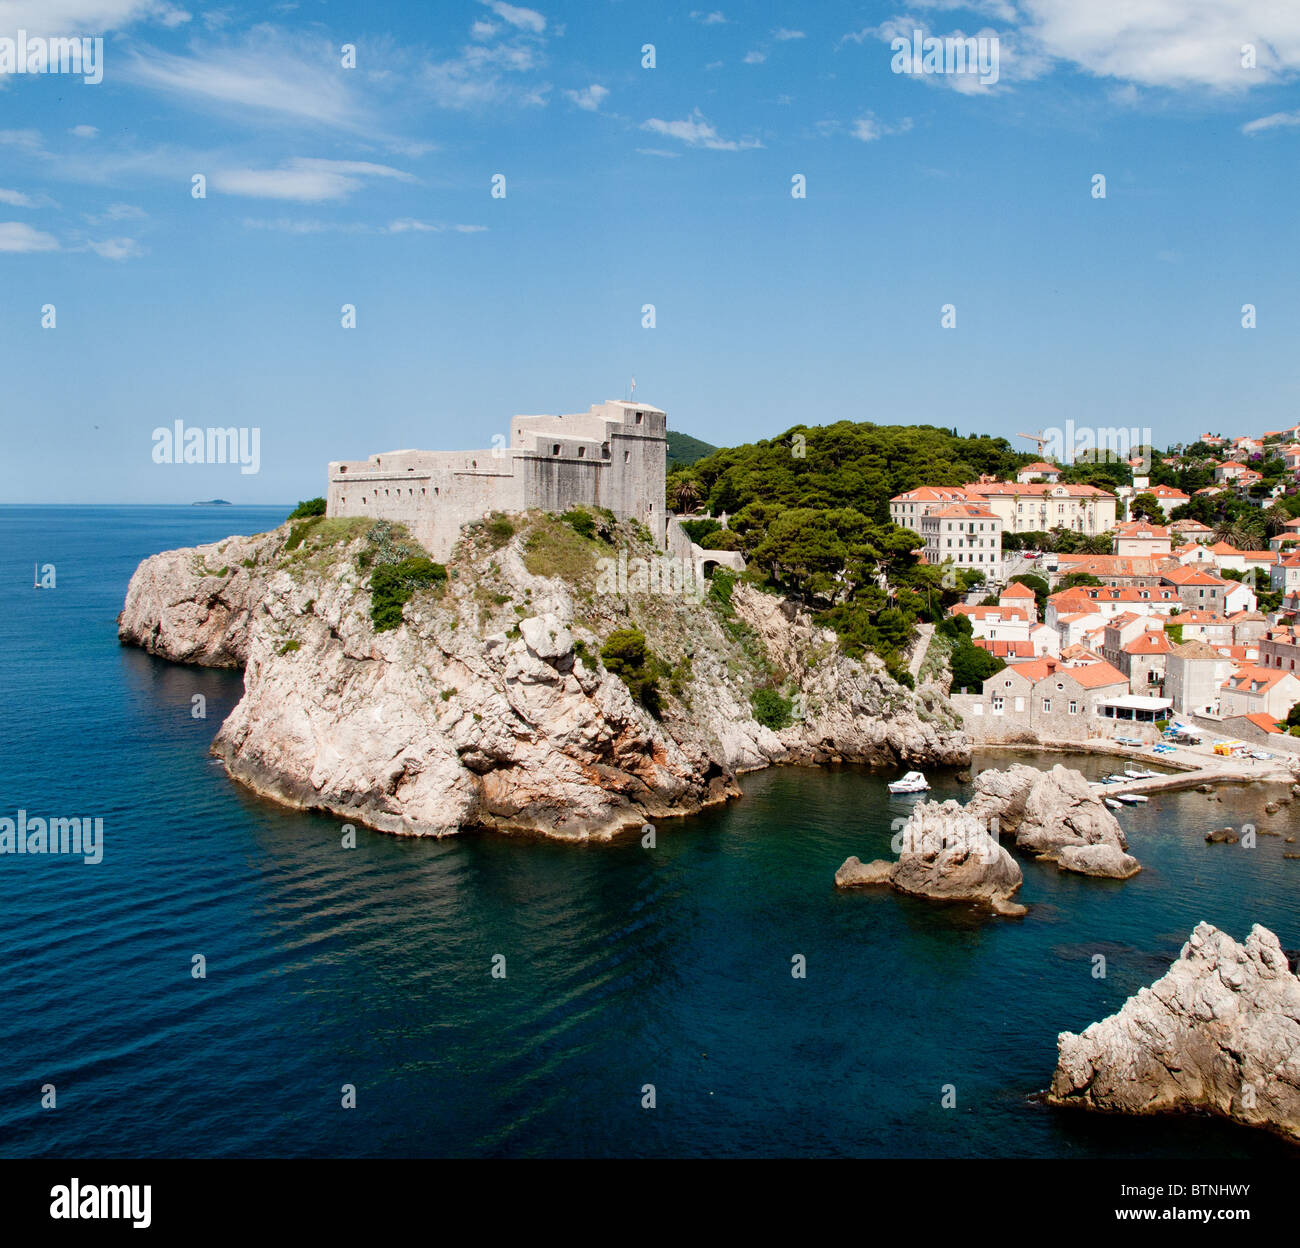 Dubrovnik castle / fortress protects the port Stock Photo